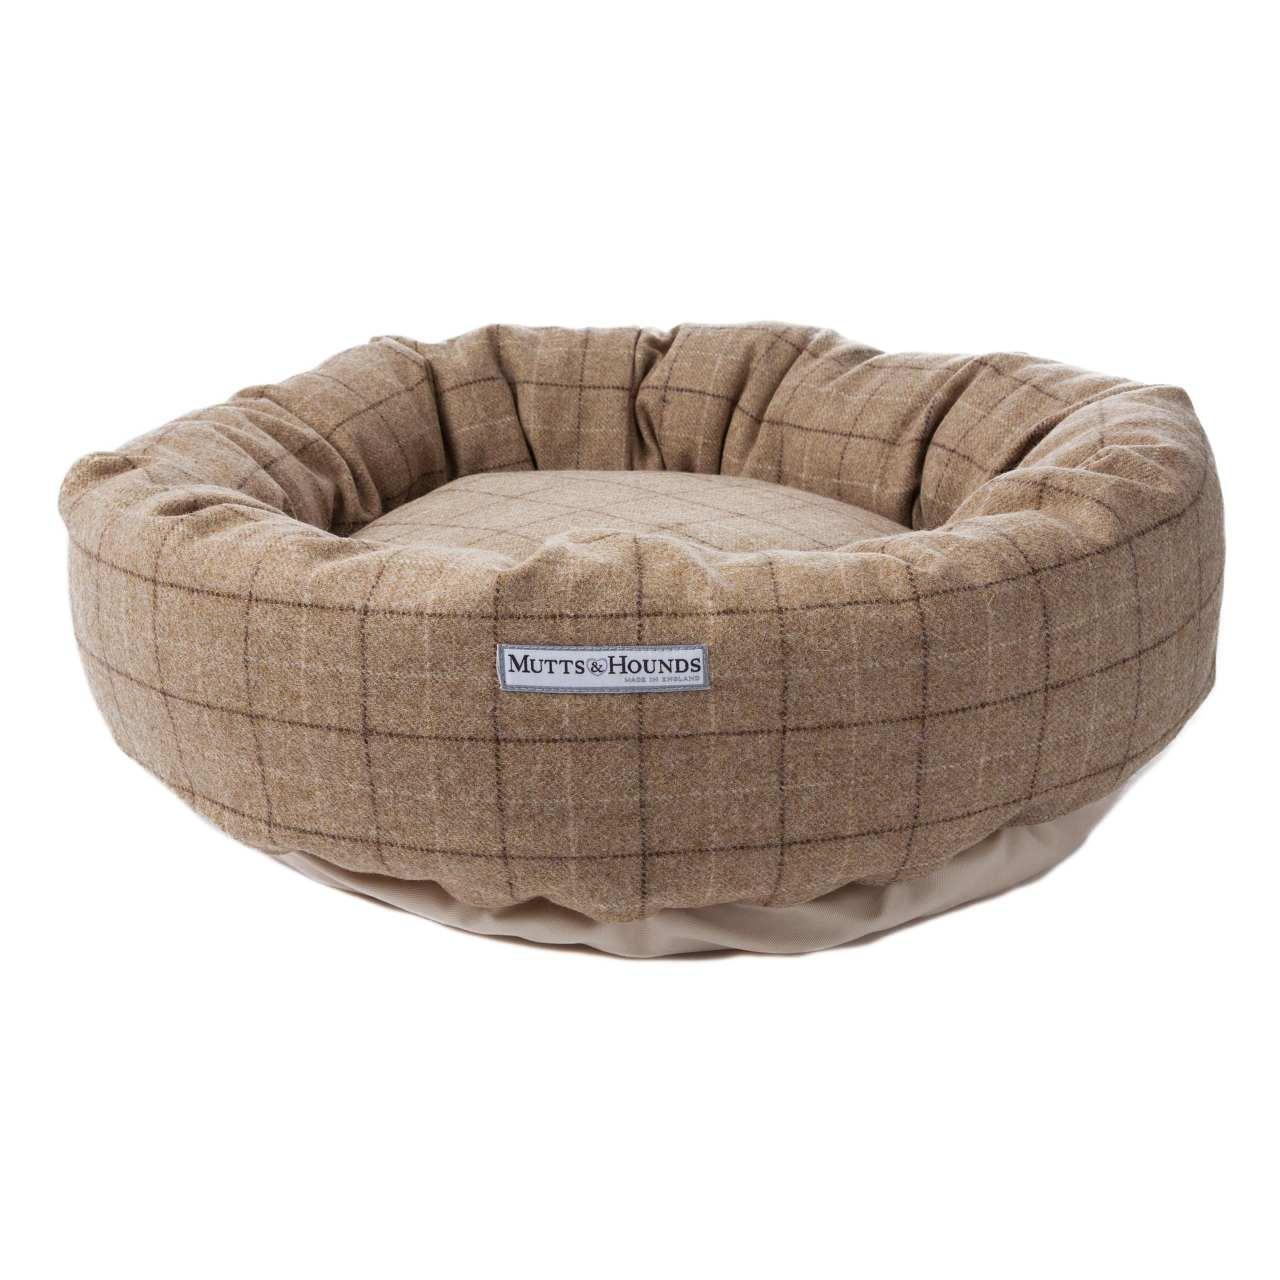 An image of Mutts & Hounds Oatmeal Tweed Donut Bed Medium